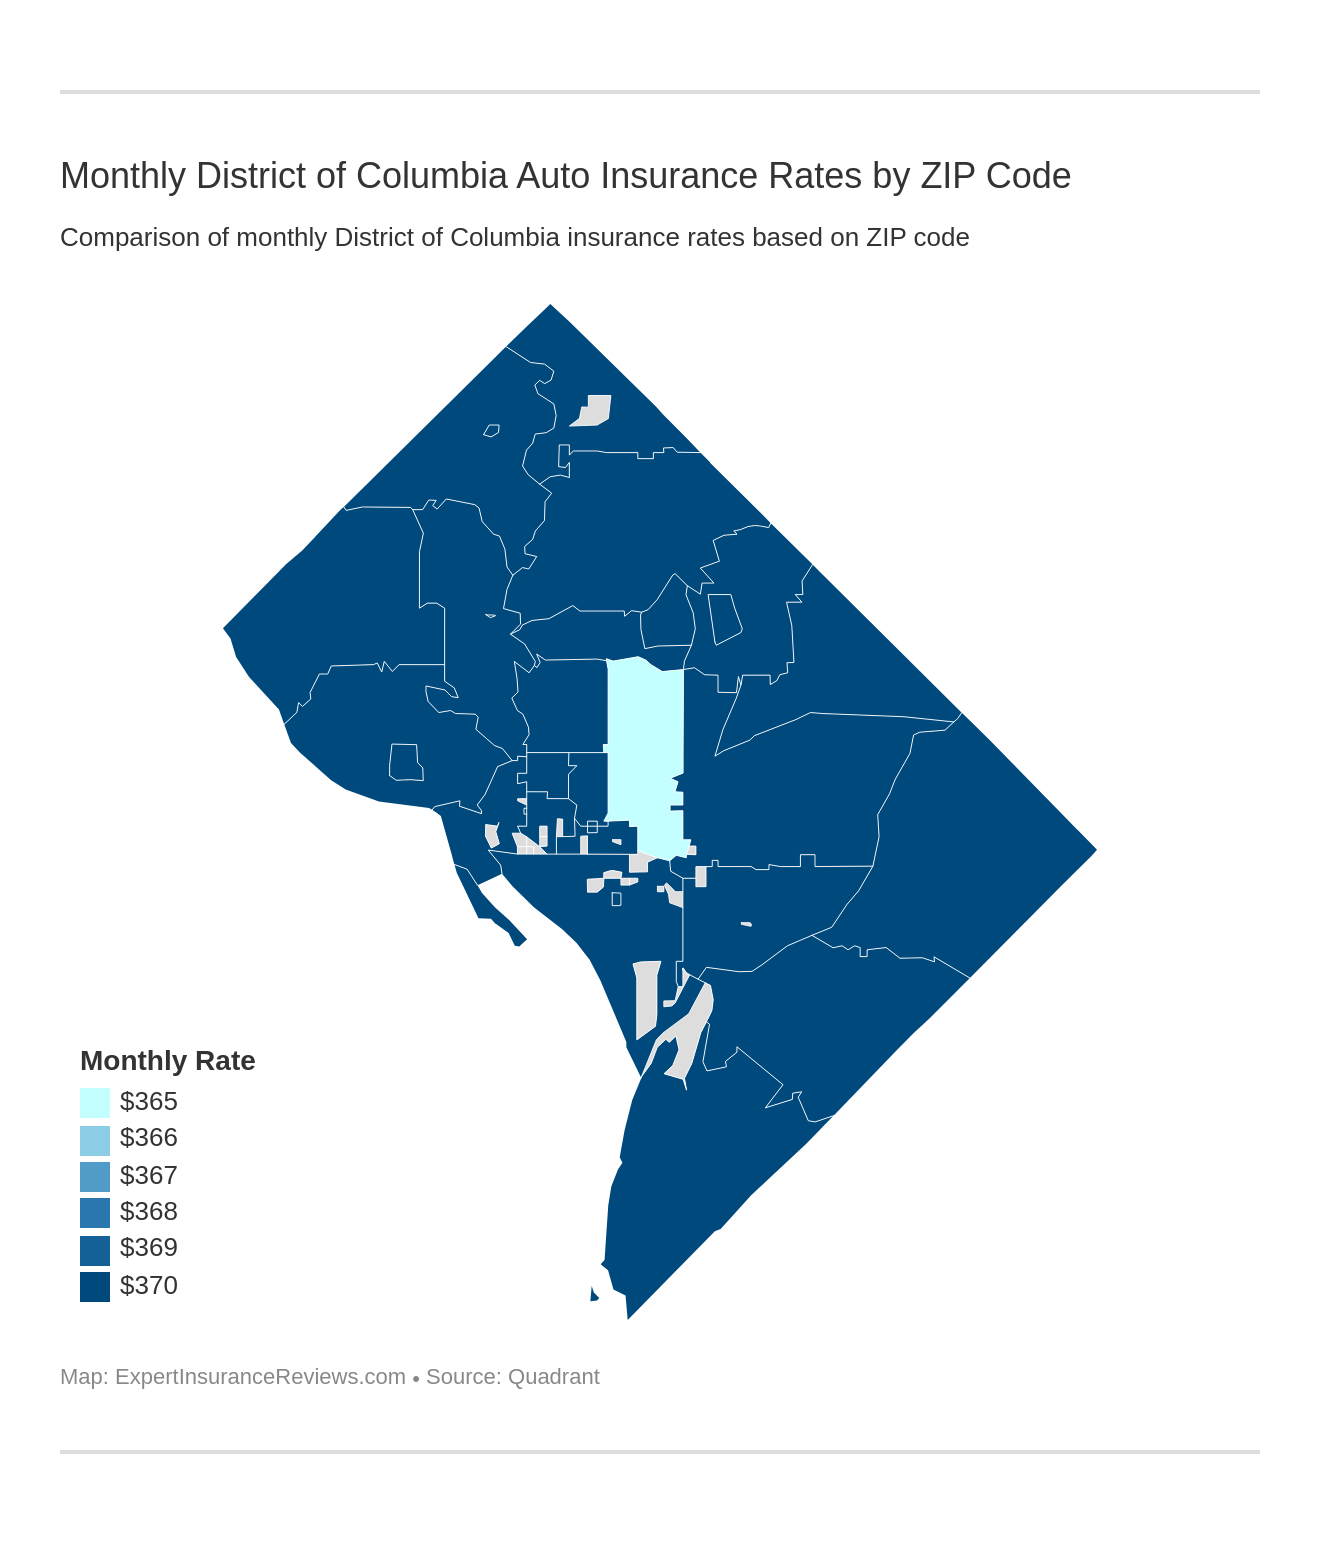 Monthly District of Columbia Auto Insurance Rates by ZIP Code